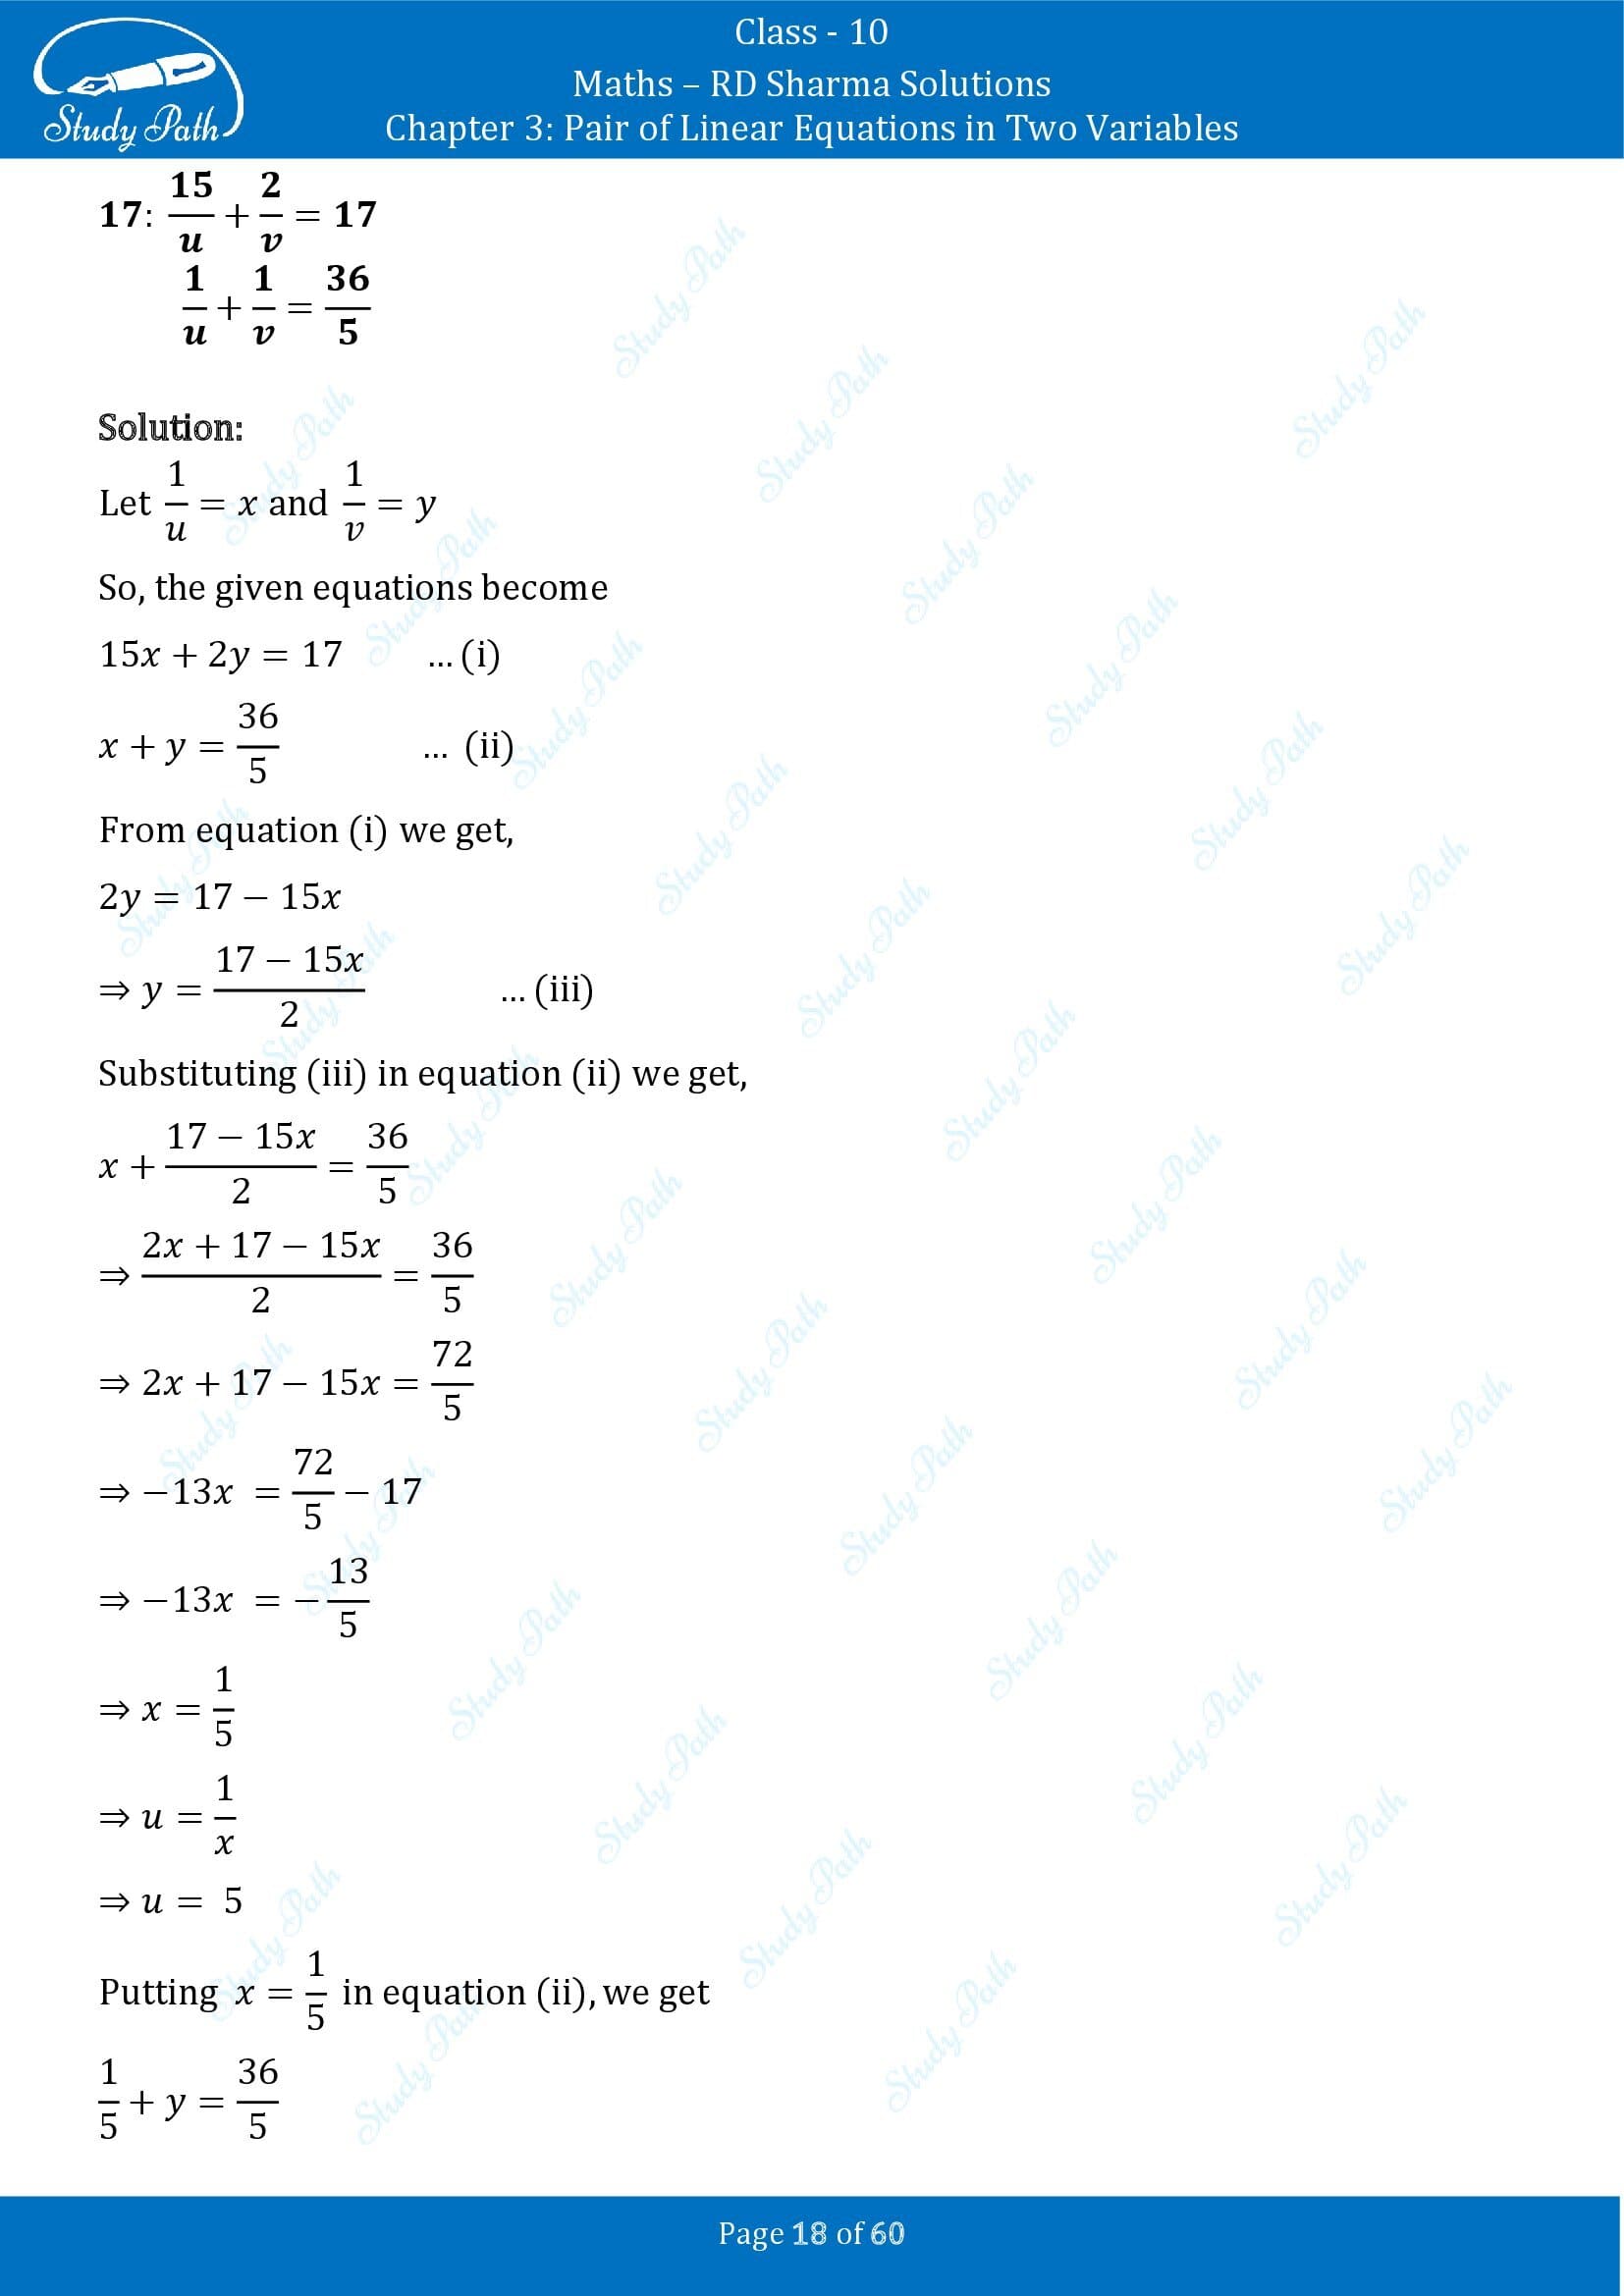 RD Sharma Solutions Class 10 Chapter 3 Pair of Linear Equations in Two Variables Exercise 3.3 00018